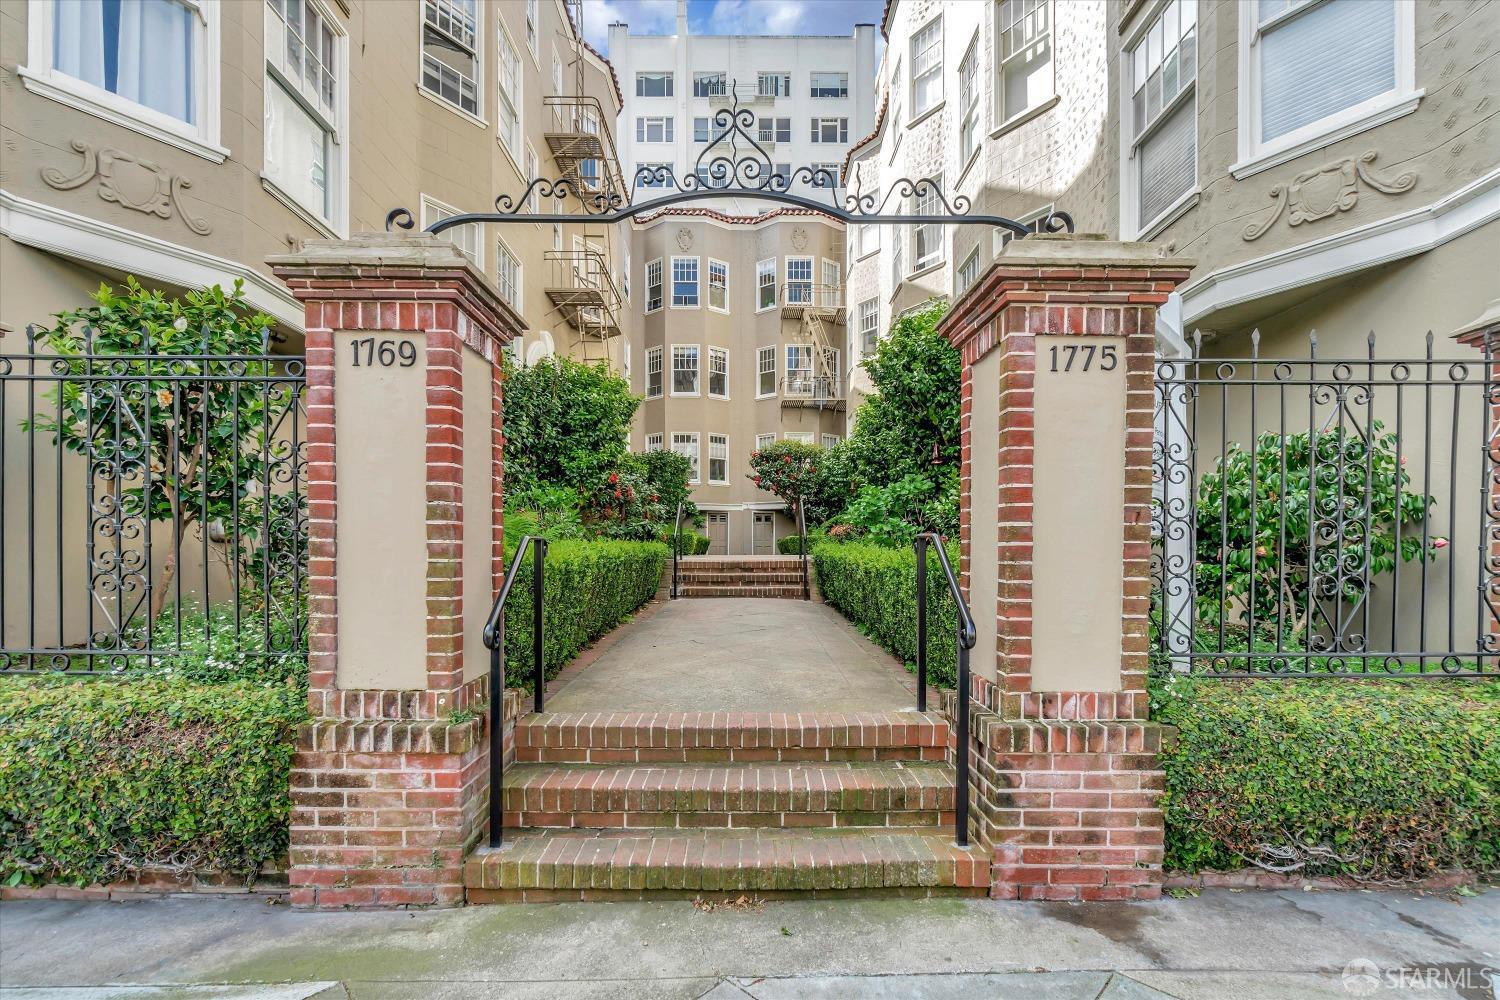 Photo of 1775 Broadway #6 in San Francisco, CA